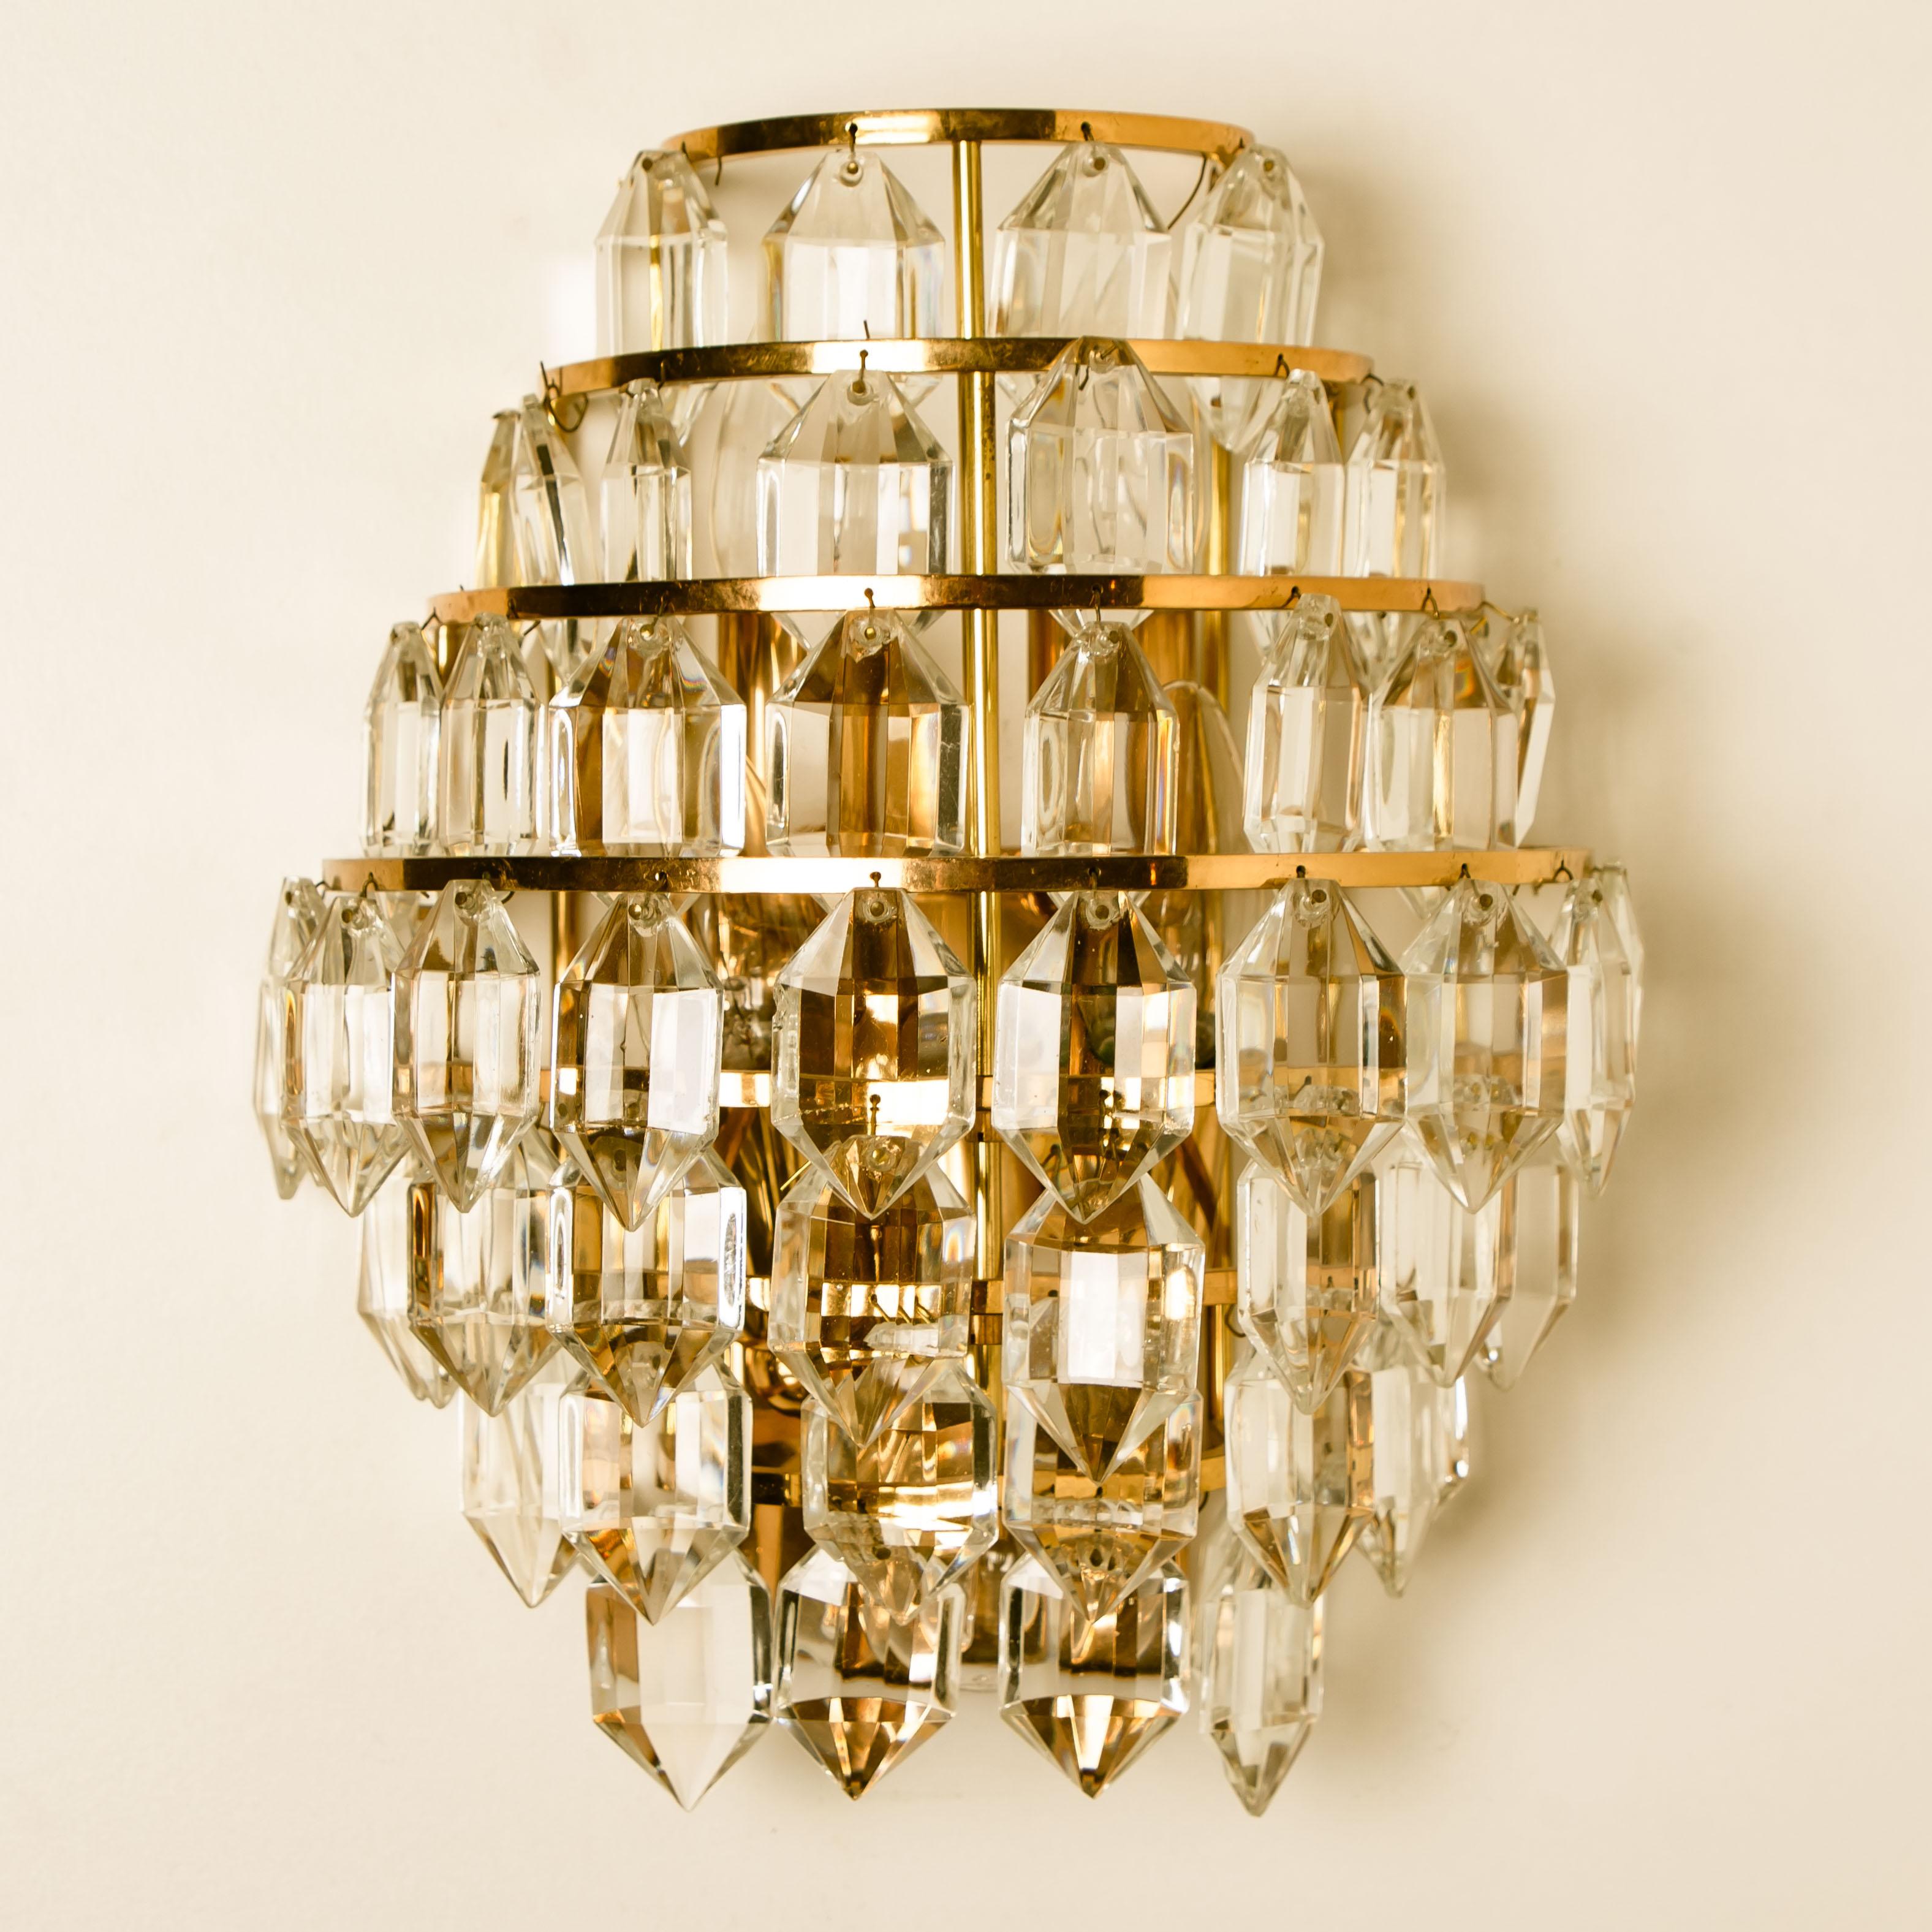 One of the Four Modern Crystal Glass Wall Sconces by Bakalowits, 1960s For Sale 4